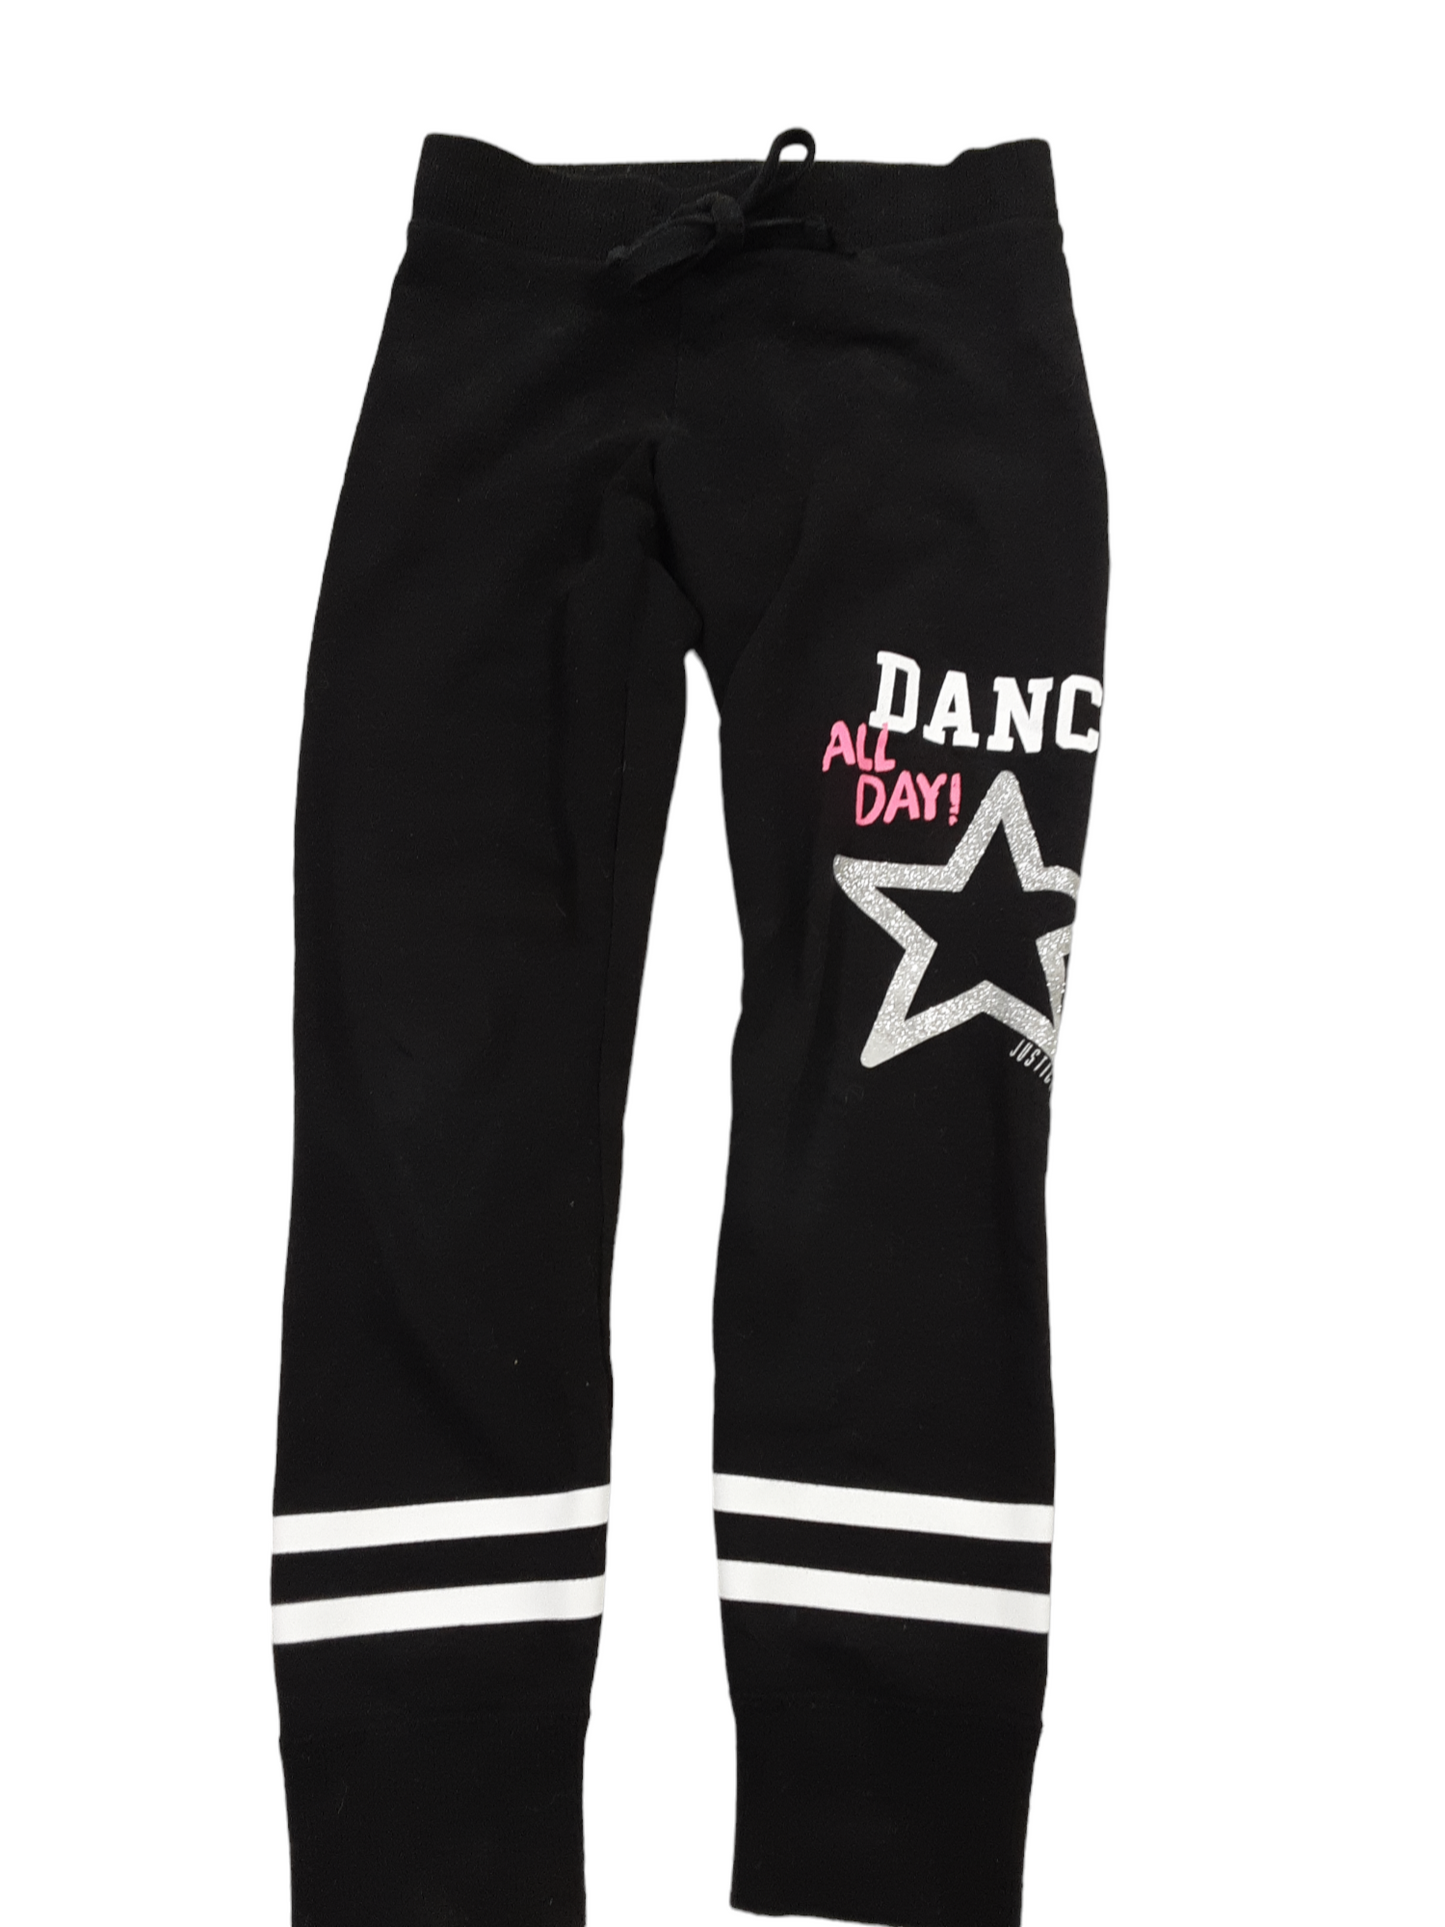 Dance All Day joggers size 7